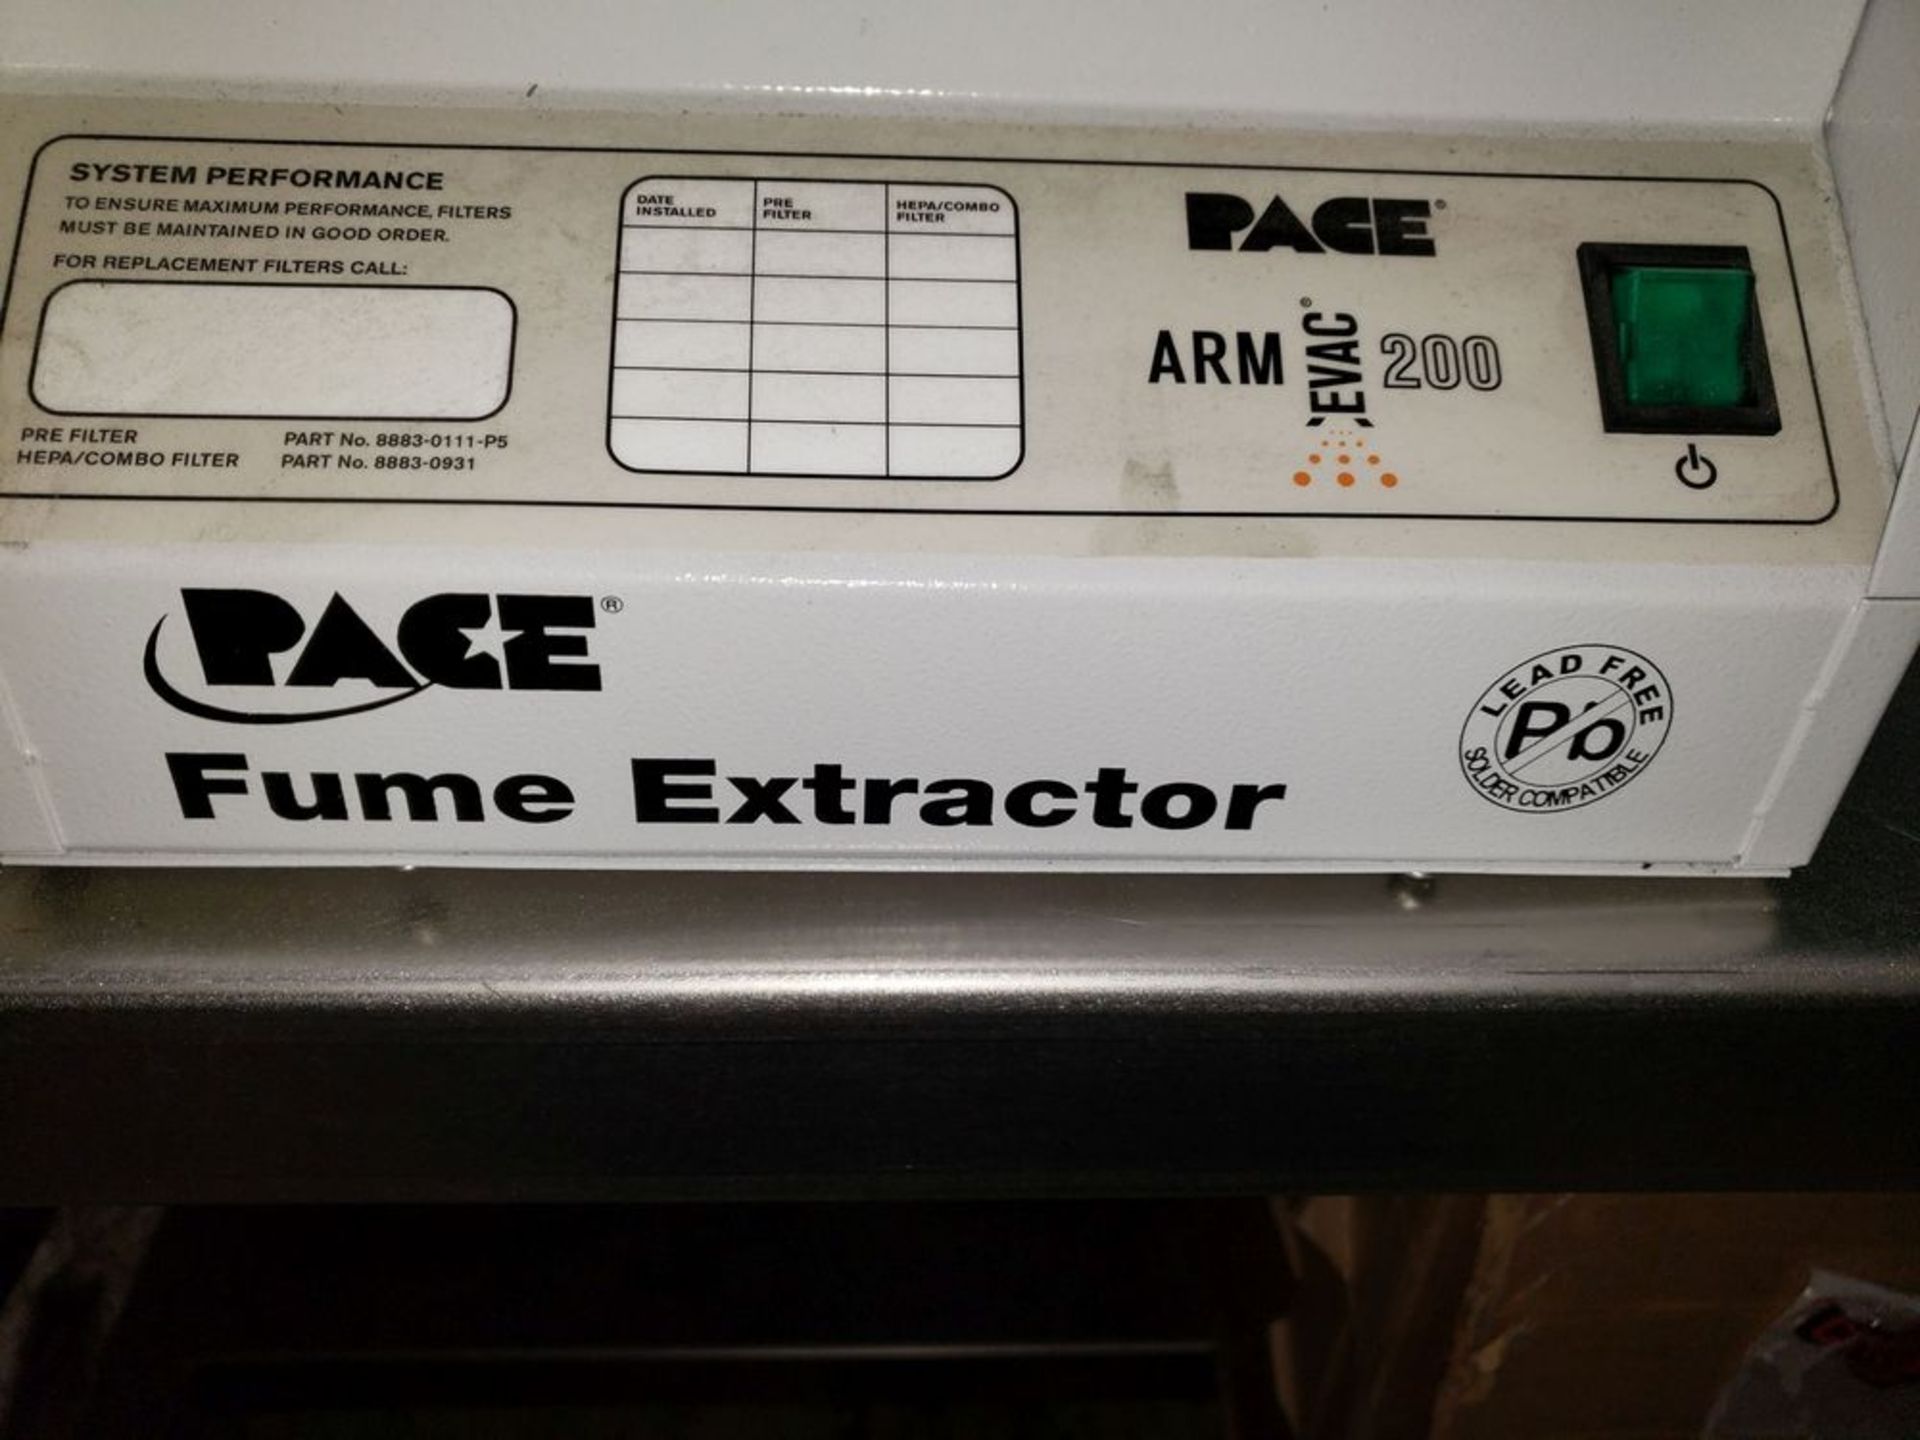 Pace fume extractor, model ARM-EVAC 200, with blower, 110 volts, serial# 802003. - Image 4 of 8